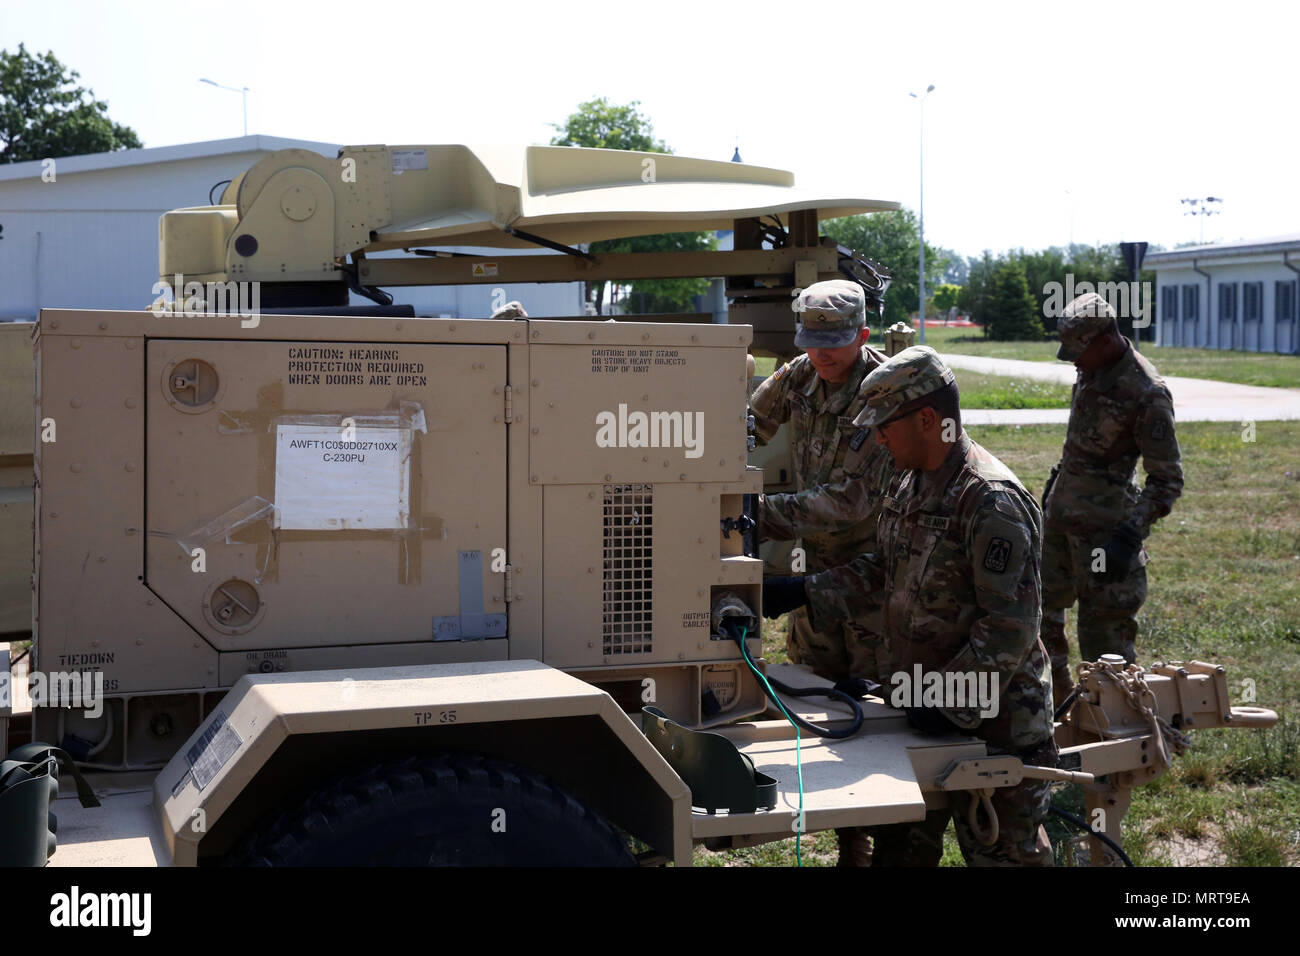 U.S. Army Soldiers assigned to Charlie Company, 86th Expeditionary Signal Battalion, 11th Signal Brigade, set up a generator and Satellite Transportable Terminal June 29, 2017 at Mihail Kogalniceanu Air Base, Romania. The 86th Expeditionary Signal Bn. from Fort Bliss, Texas is augmenting 2nd Theater Signal Brigade with additional tactical signal assets and capability for exercise Saber Guardian 17, a U.S. Army Europe-led, multinational exercise, taking place in Bulgaria, Hungary and Romania July 11-20, 2017. (U.S. Army photo by William B. King) Stock Photo